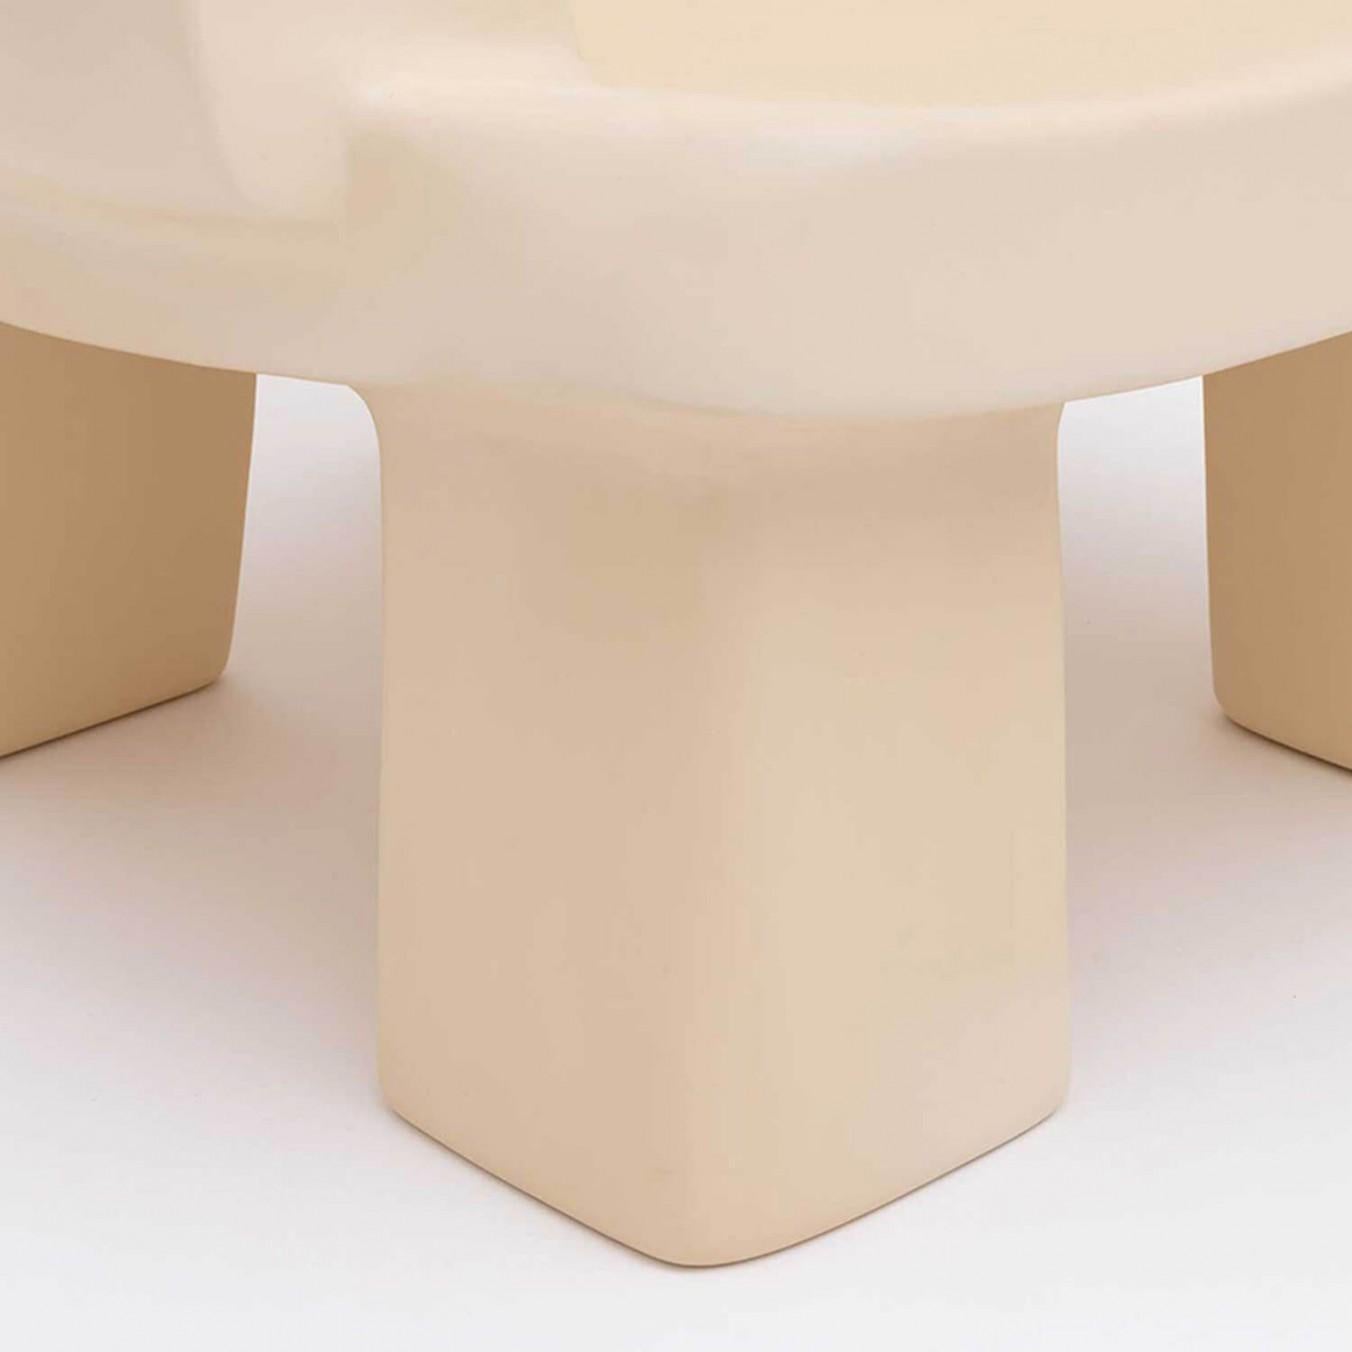 Contemporary fiberglass armchair - Fudge Chair by Faye Toogood. This is shown in the cream fiberglass finish. 
Design: Faye Toogood
Material: Fiberglass 
Available also in charcoal, malachite or mallow opaque finish

Faye Toogood’s new Fudge